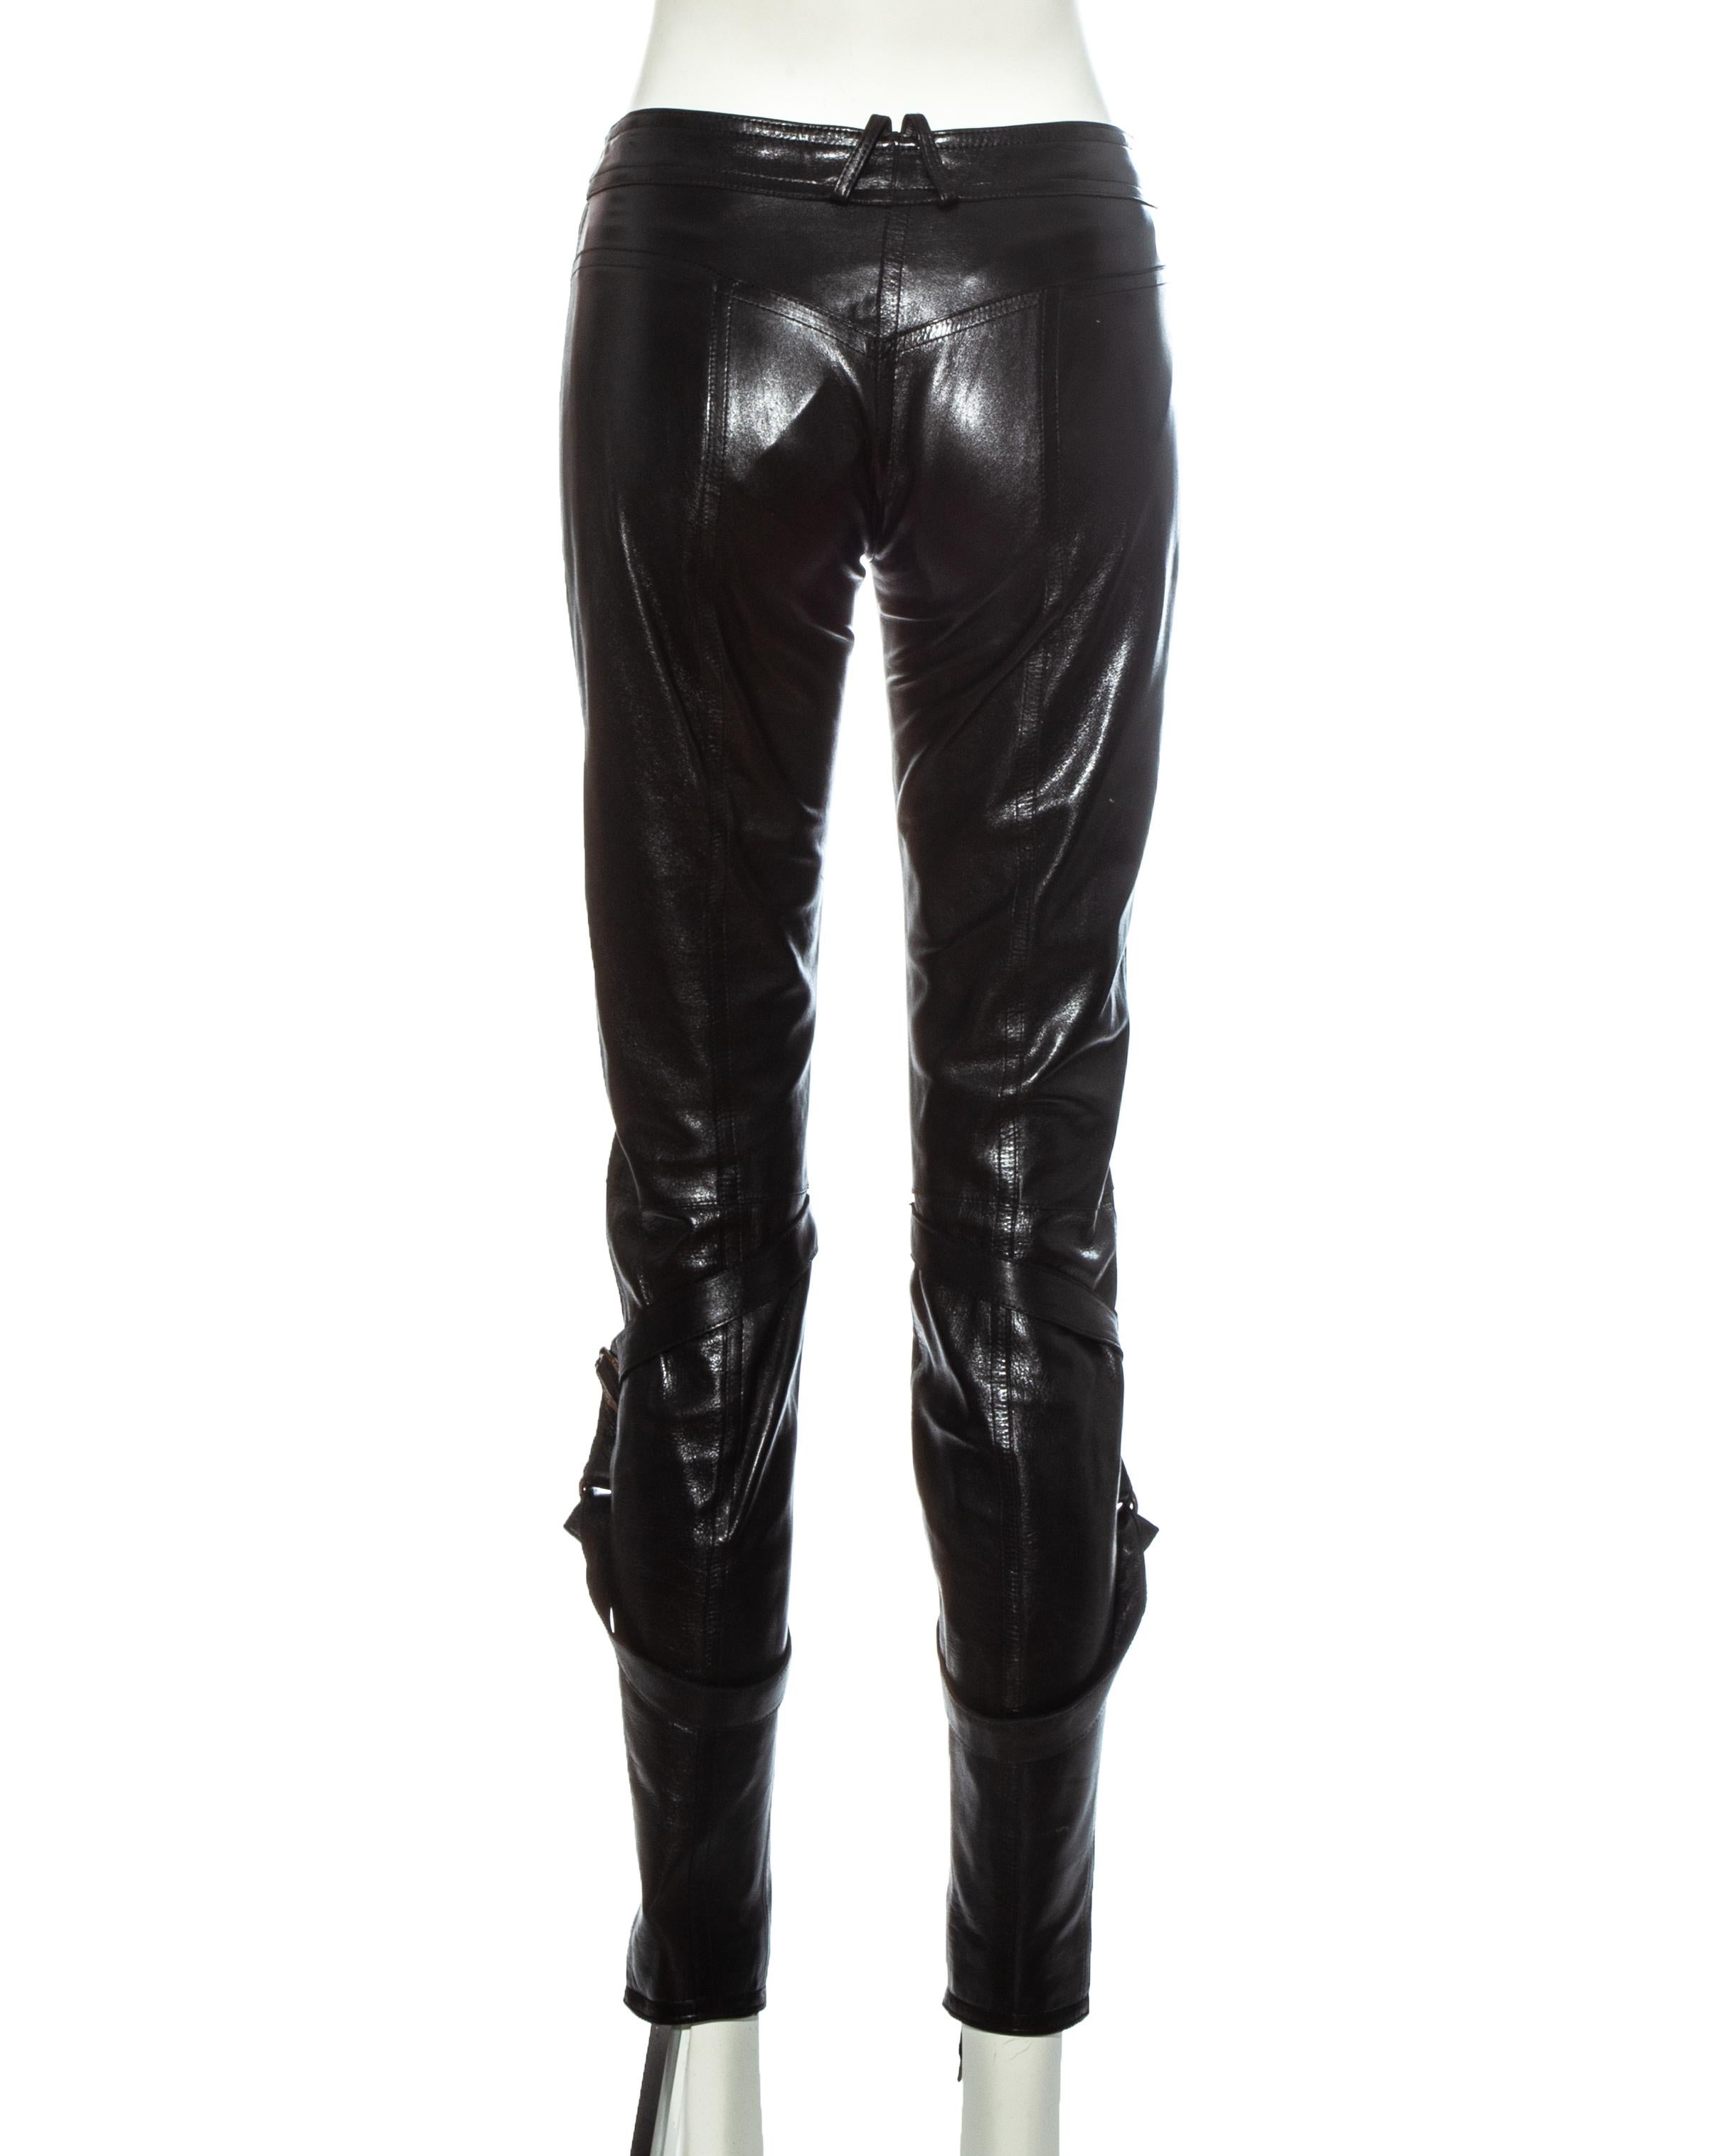 Christian Dior by John Galliano black leather lace up pants, fw 2003 In Excellent Condition For Sale In London, GB